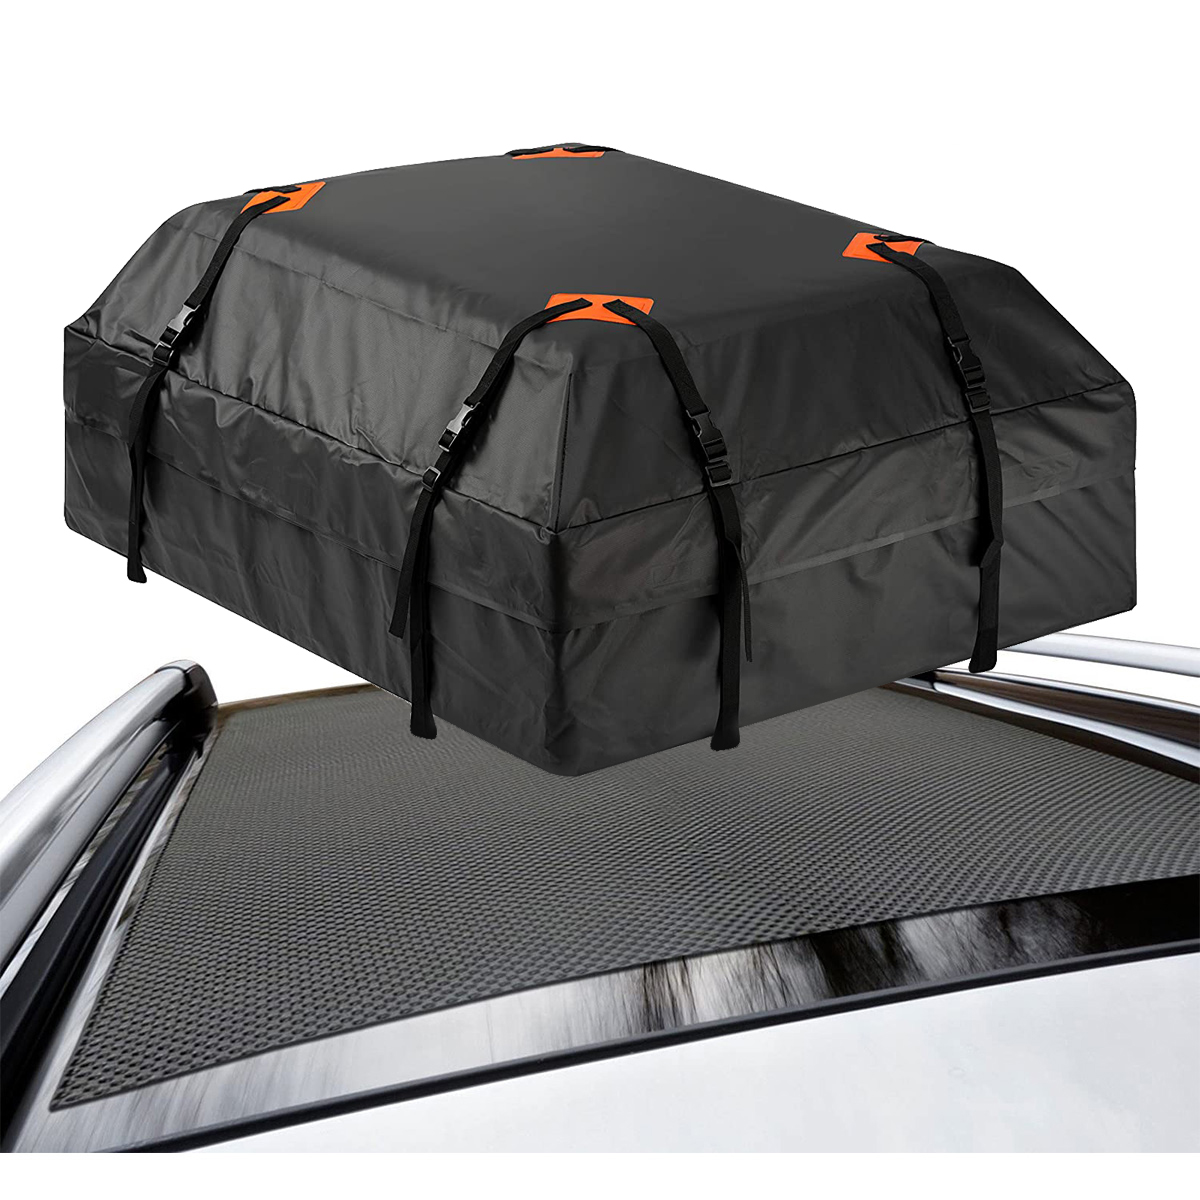 475L-Car-Rooftop-Cargo-Bag-420D-Waterproof-Car-Top-Carrier-Bag-Luggage-Storage-for-Outdoor-Travel-Ca-1888699-11